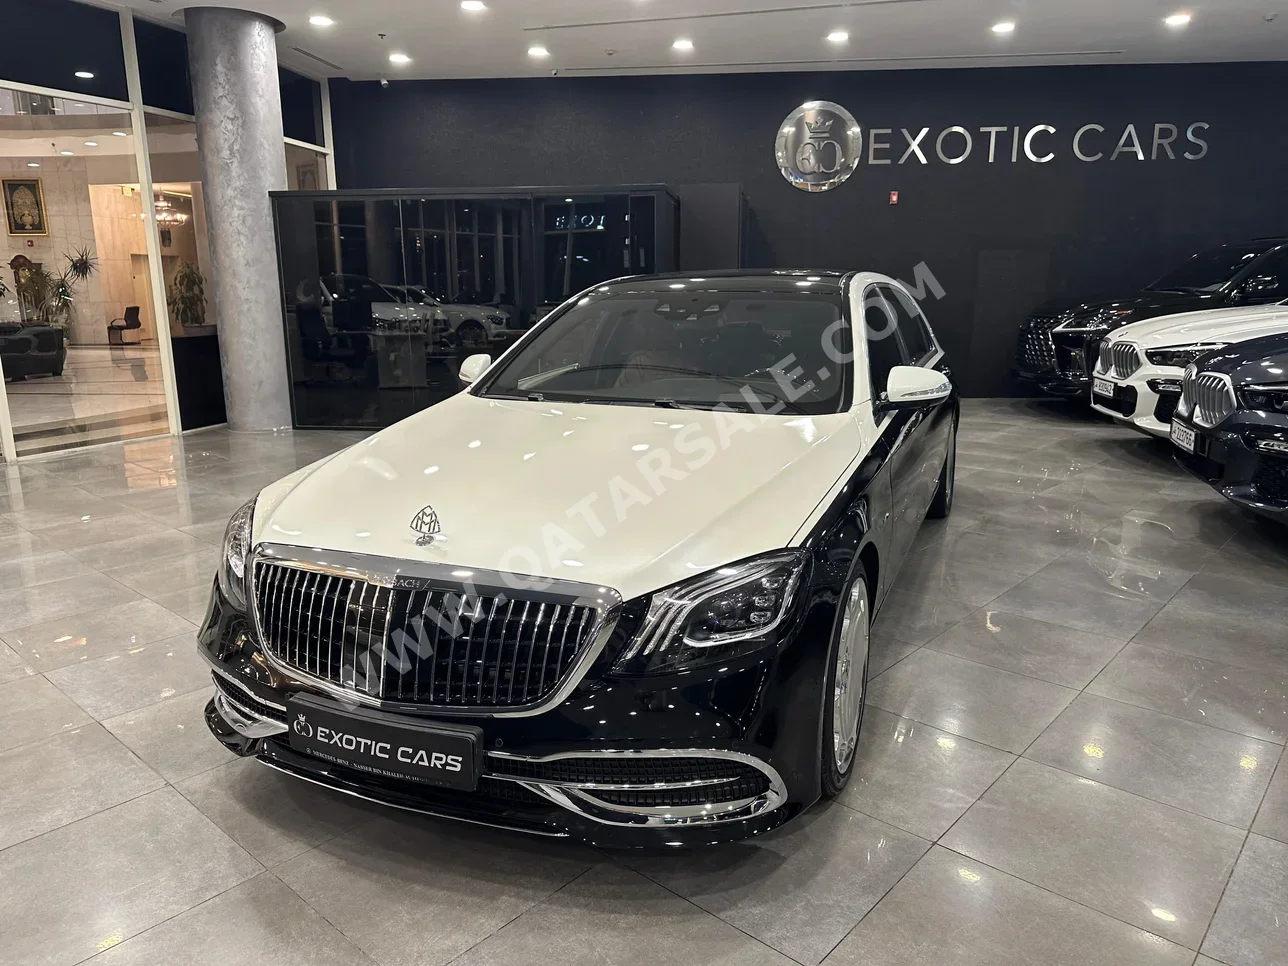 Mercedes-Benz  Maybach  S600  2016  Automatic  95,000 Km  12 Cylinder  All Wheel Drive (AWD)  Sedan  White and Black